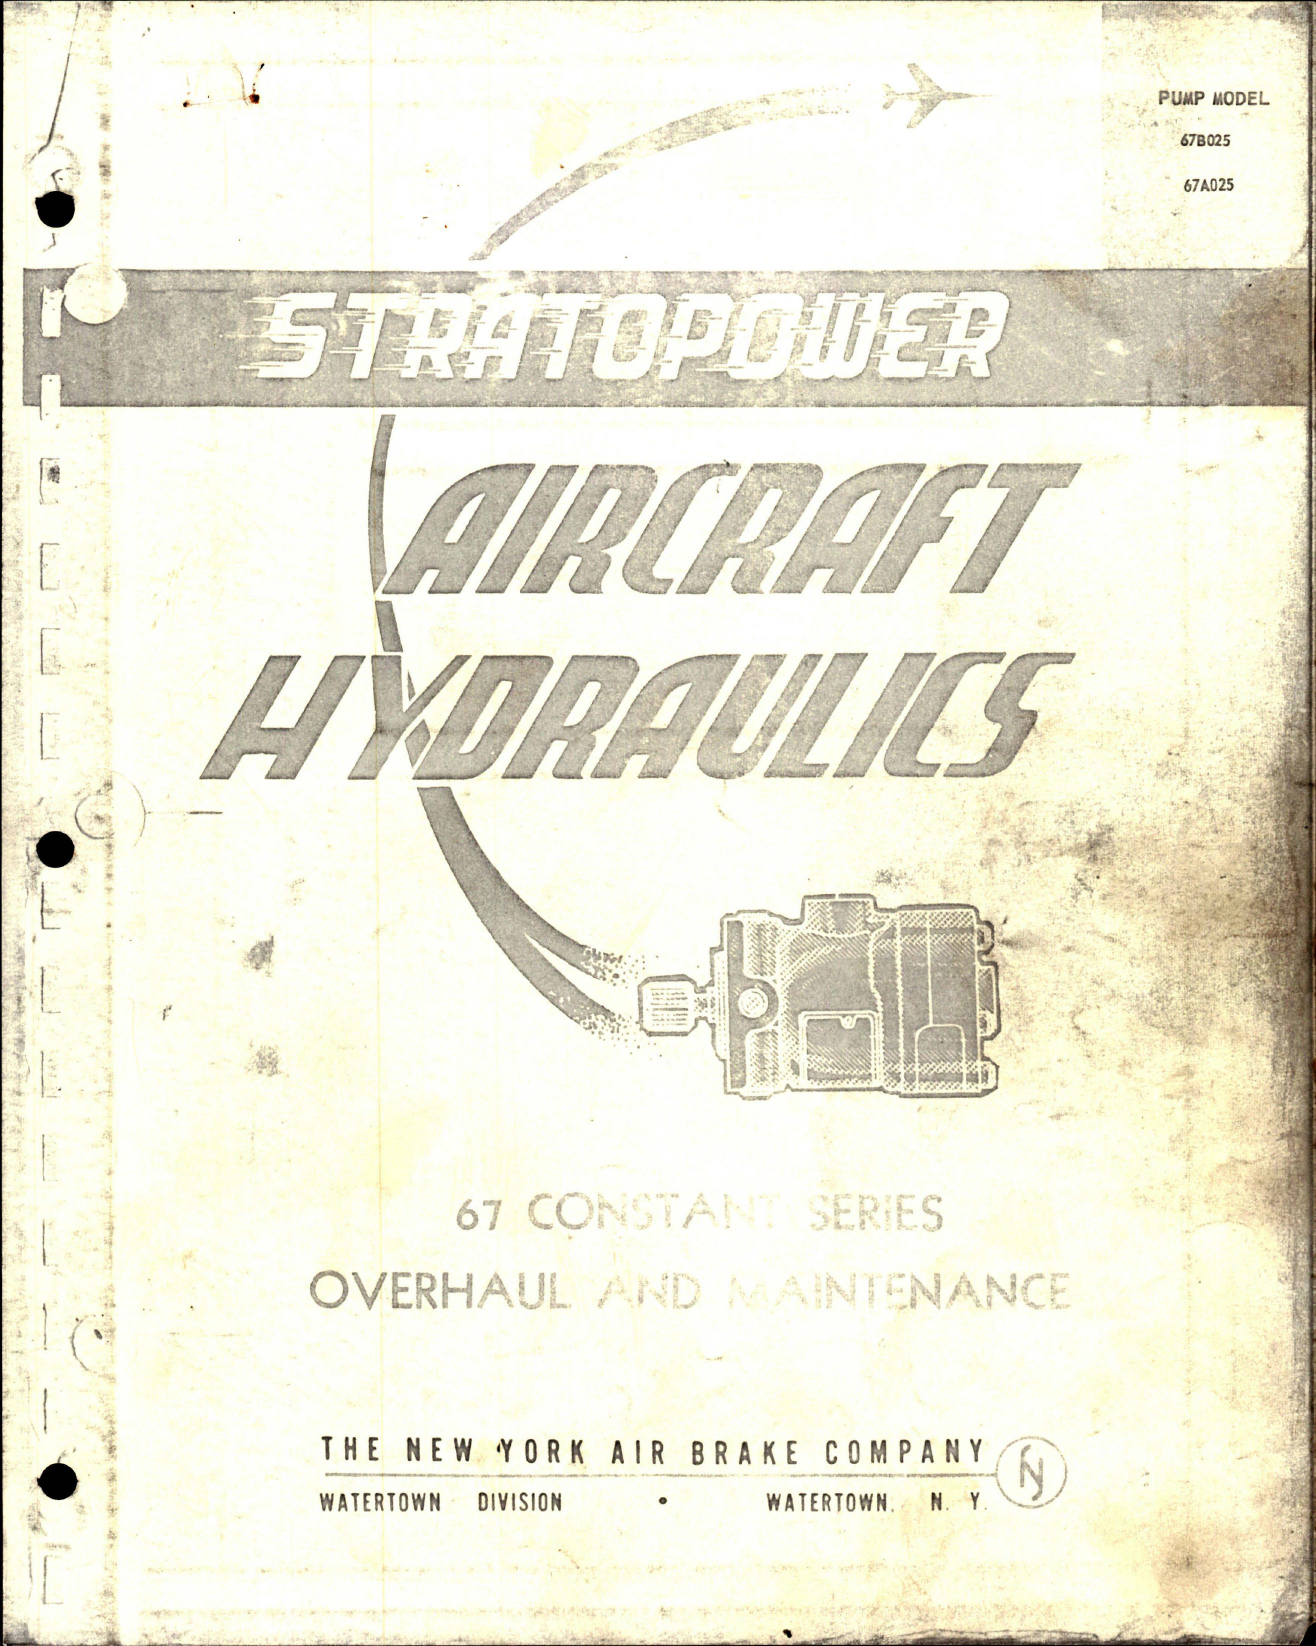 Sample page 1 from AirCorps Library document: Overhaul and Maintenance for Stratopower Aircraft Hydraulics - 67 Constant Series 